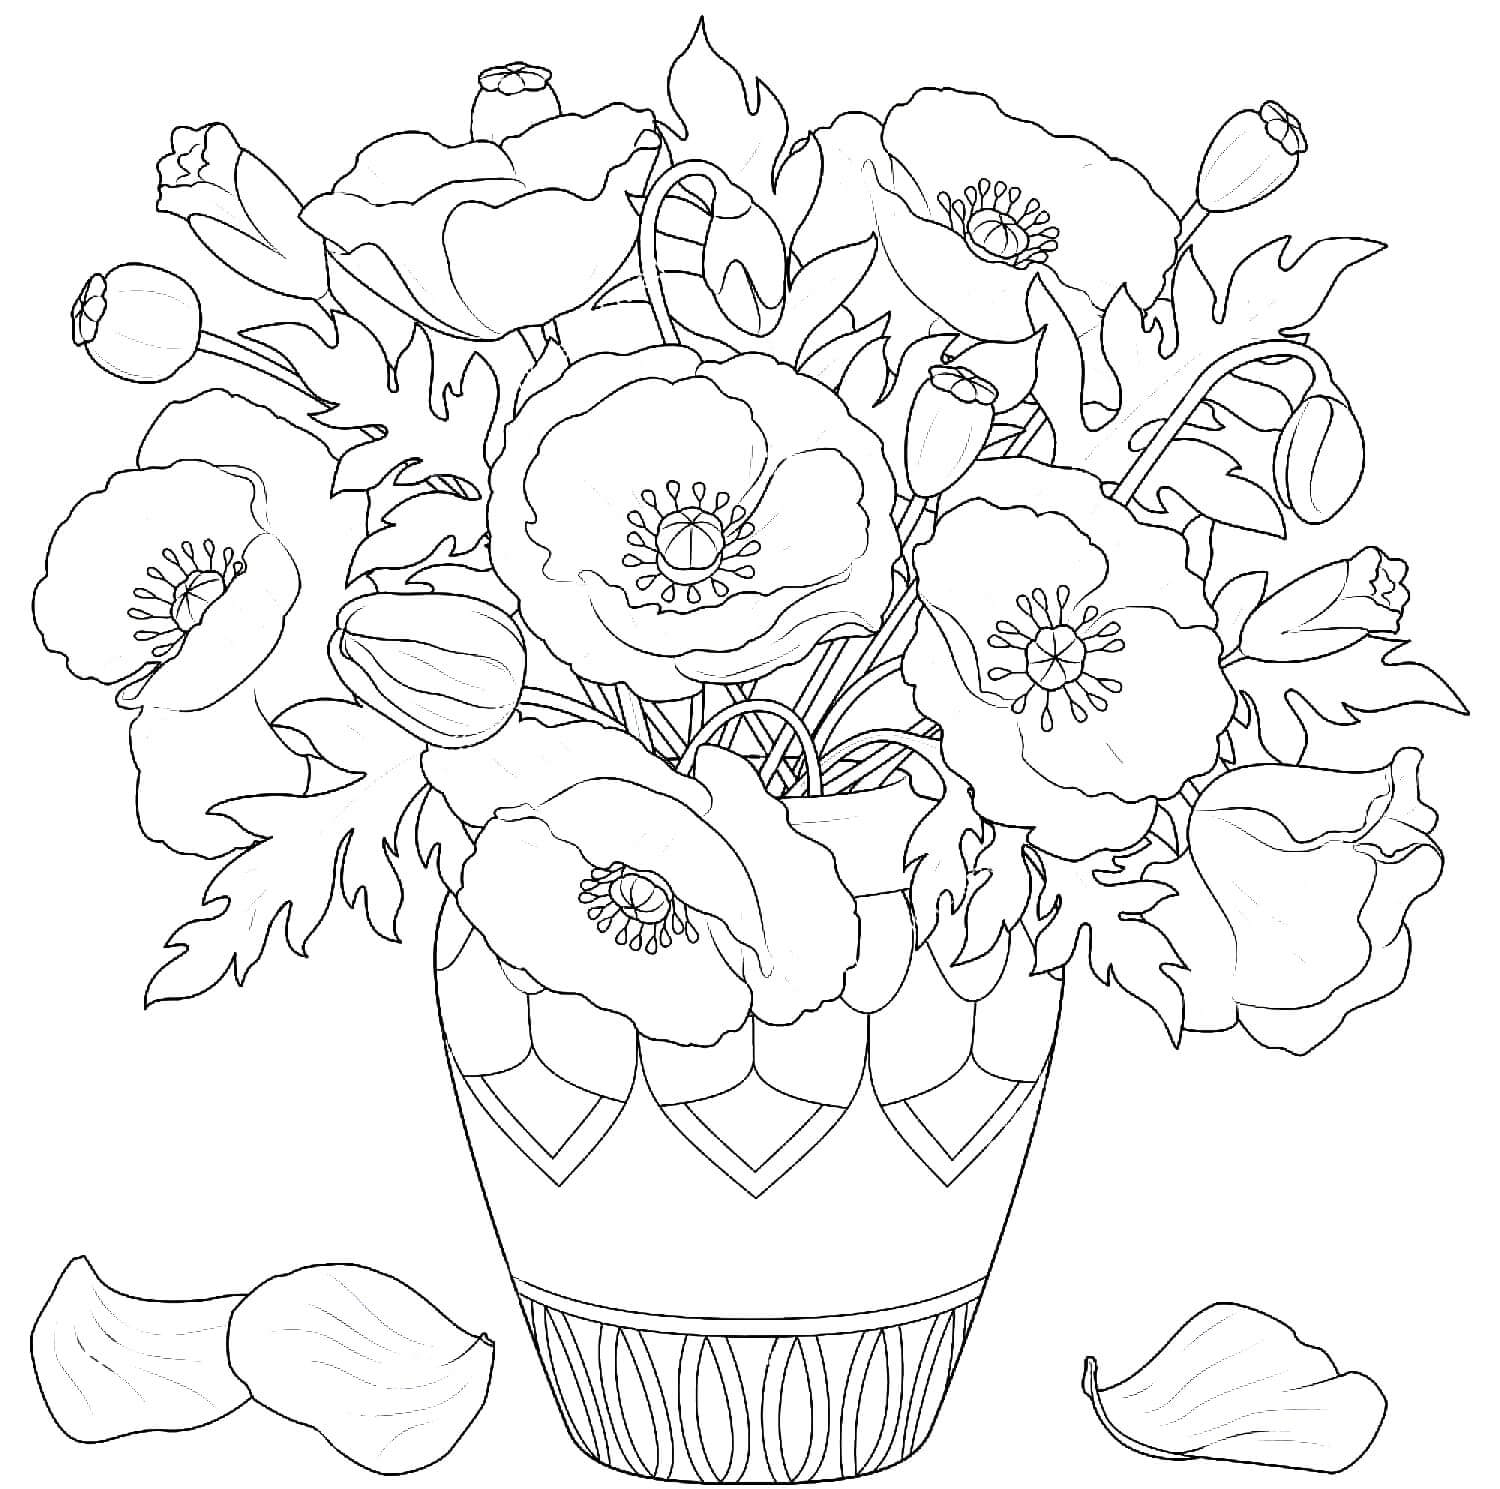 Flower Sphere coloring page for adults Digital Download Printable coloring page